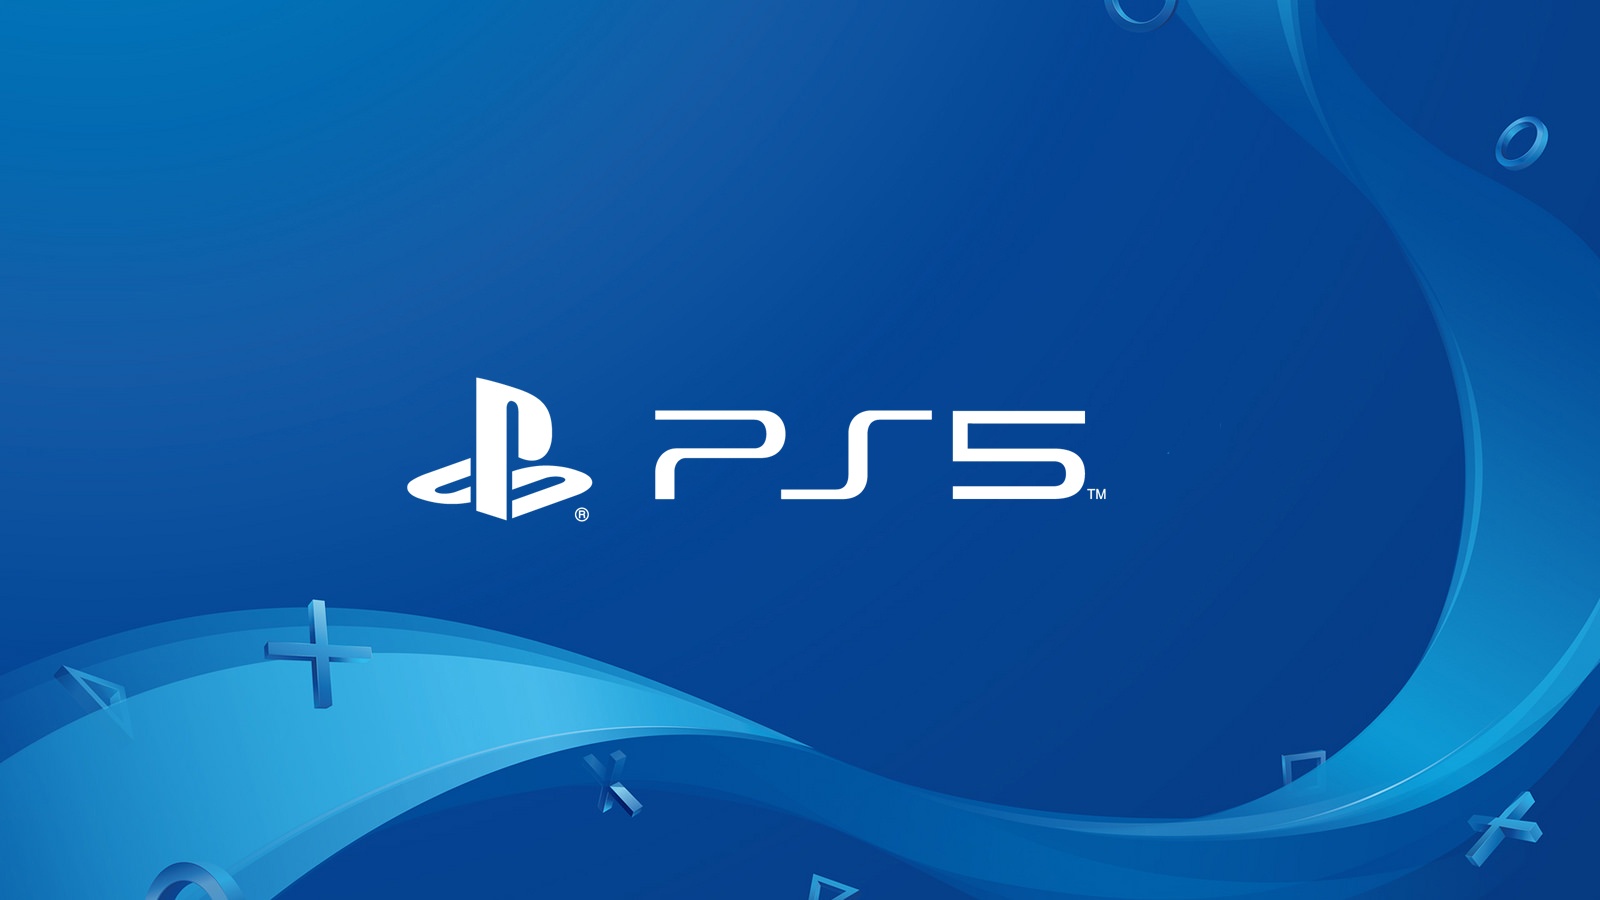 Guide: What is PS5 Boost Mode? And What Does it Mean for PS5/PS4 Backwards Compatibility?